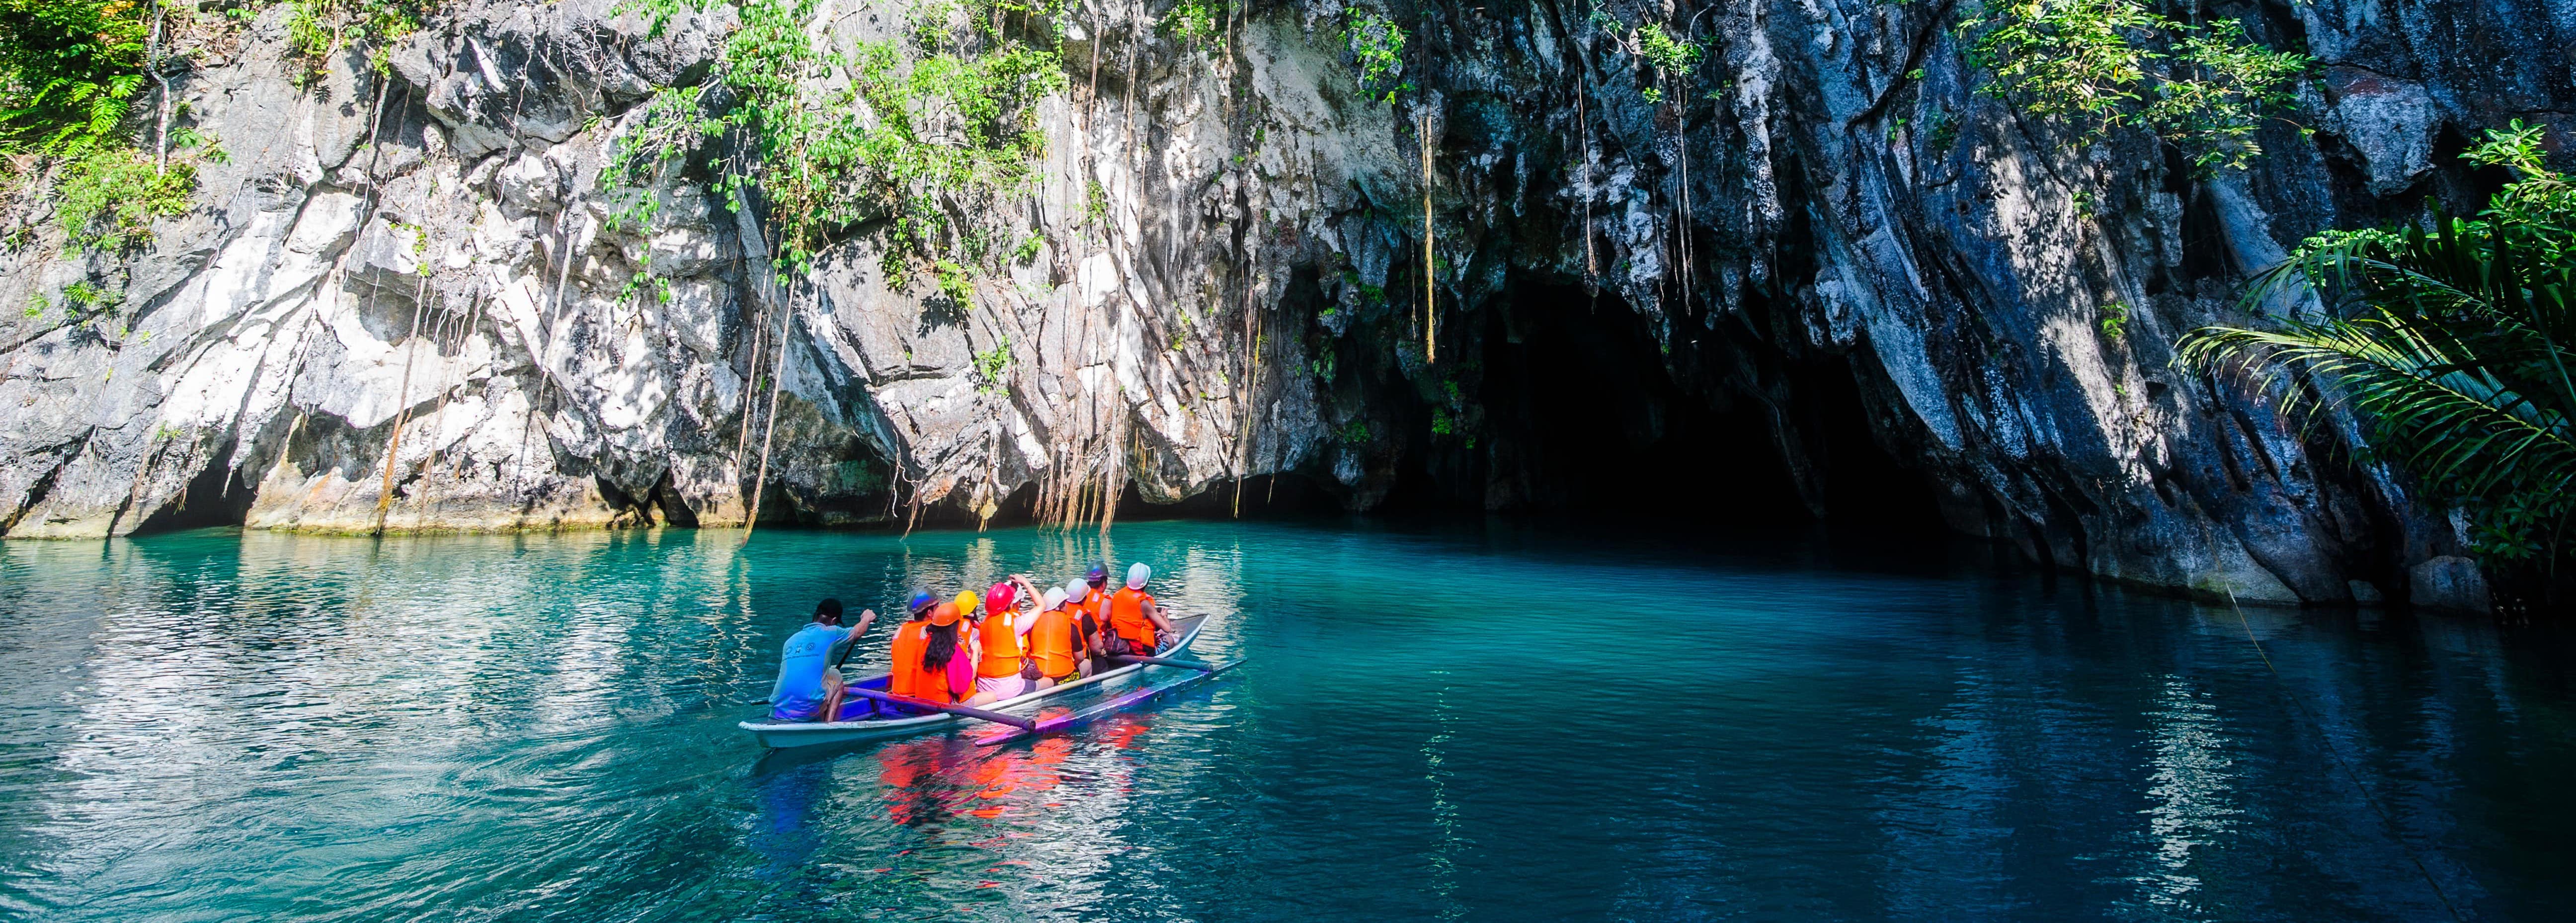 A boat full of tourists exploring Puerto Princesa Underground River